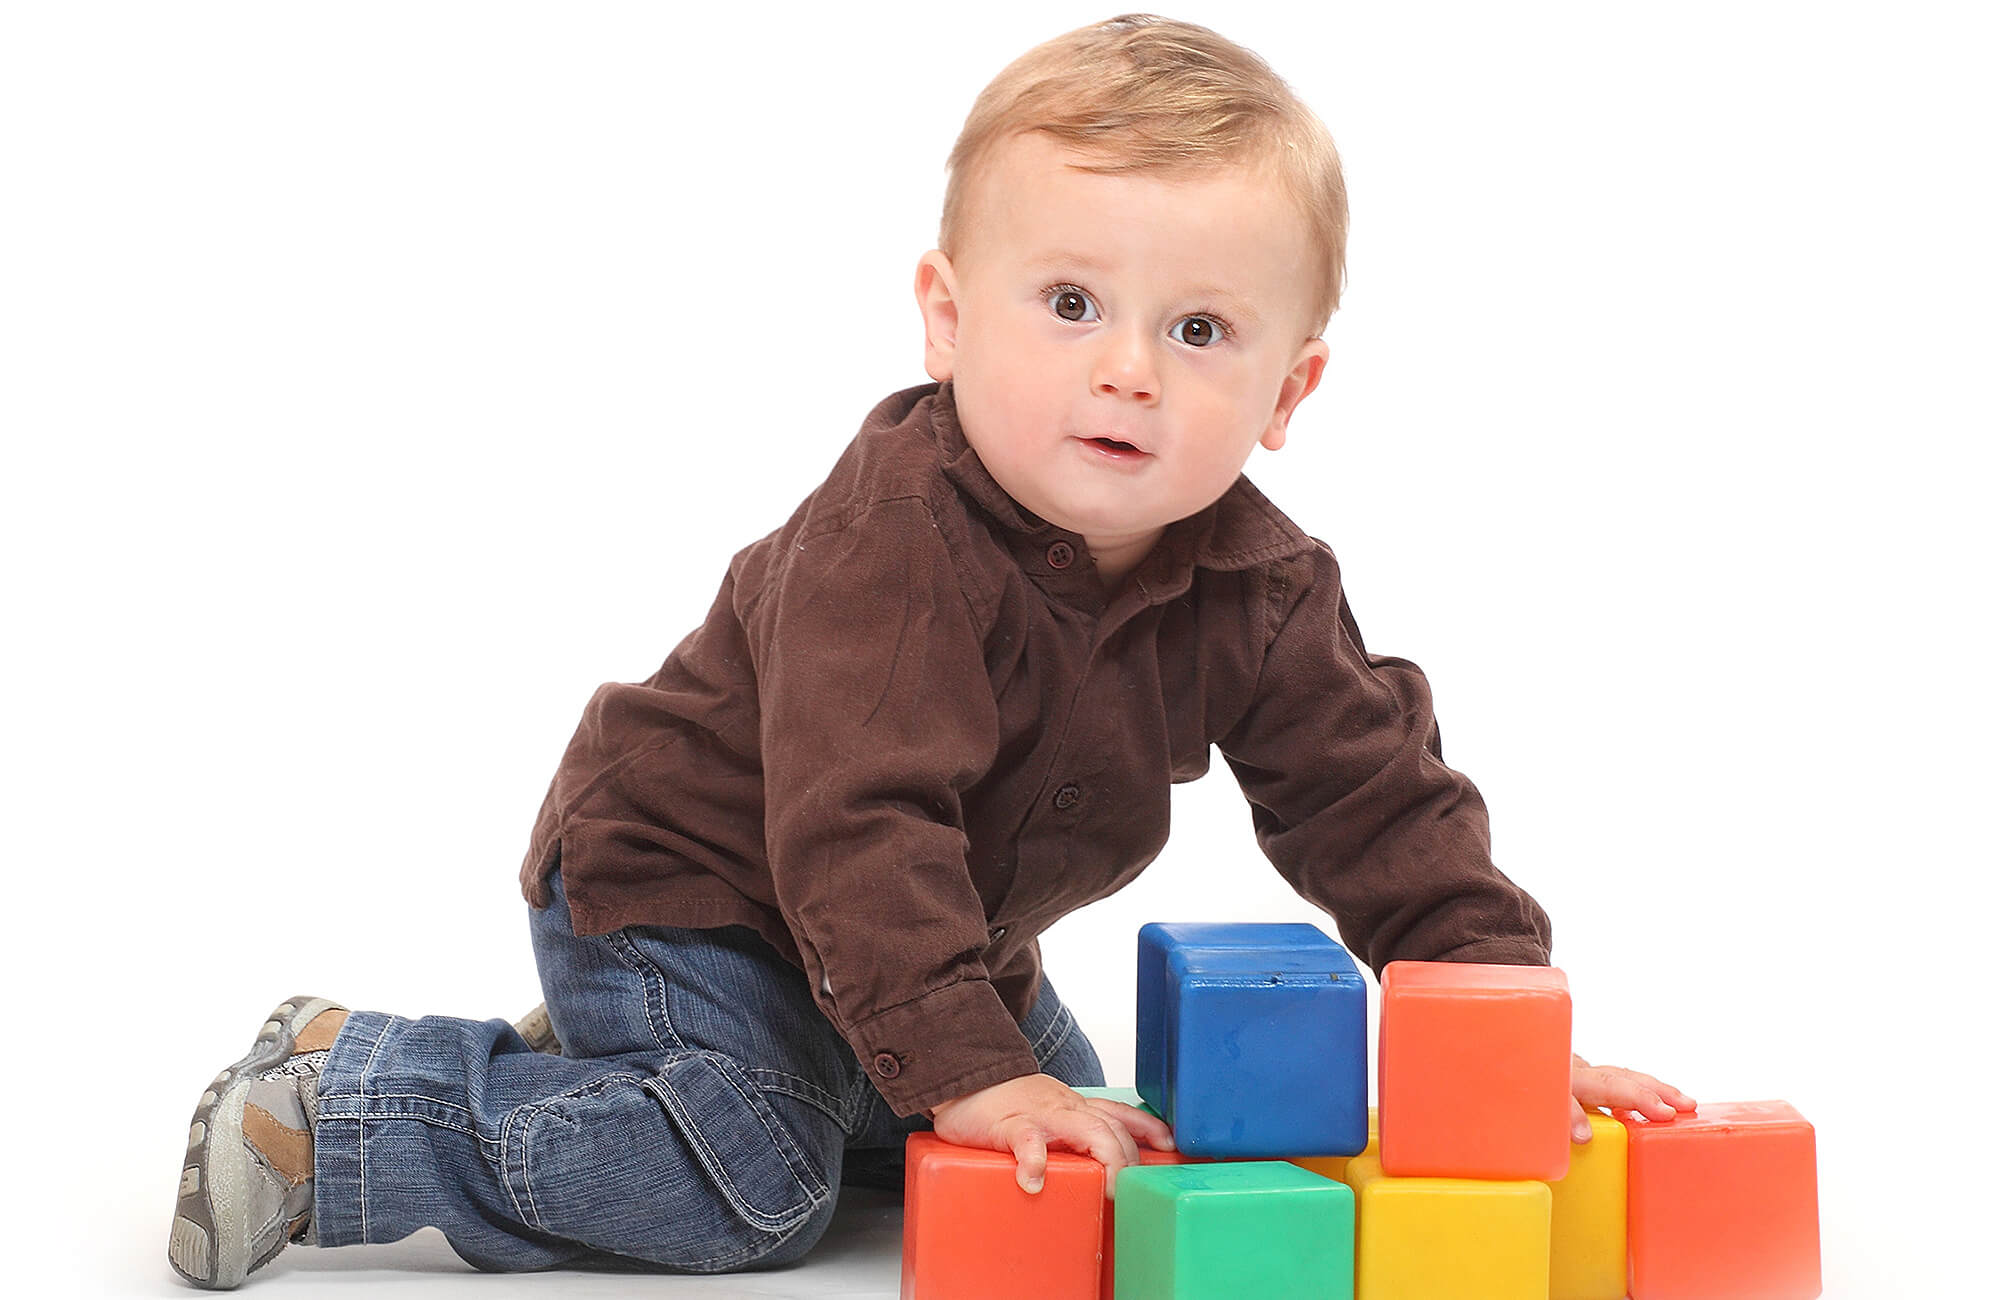 Photograph of toddler with plastic blocks.